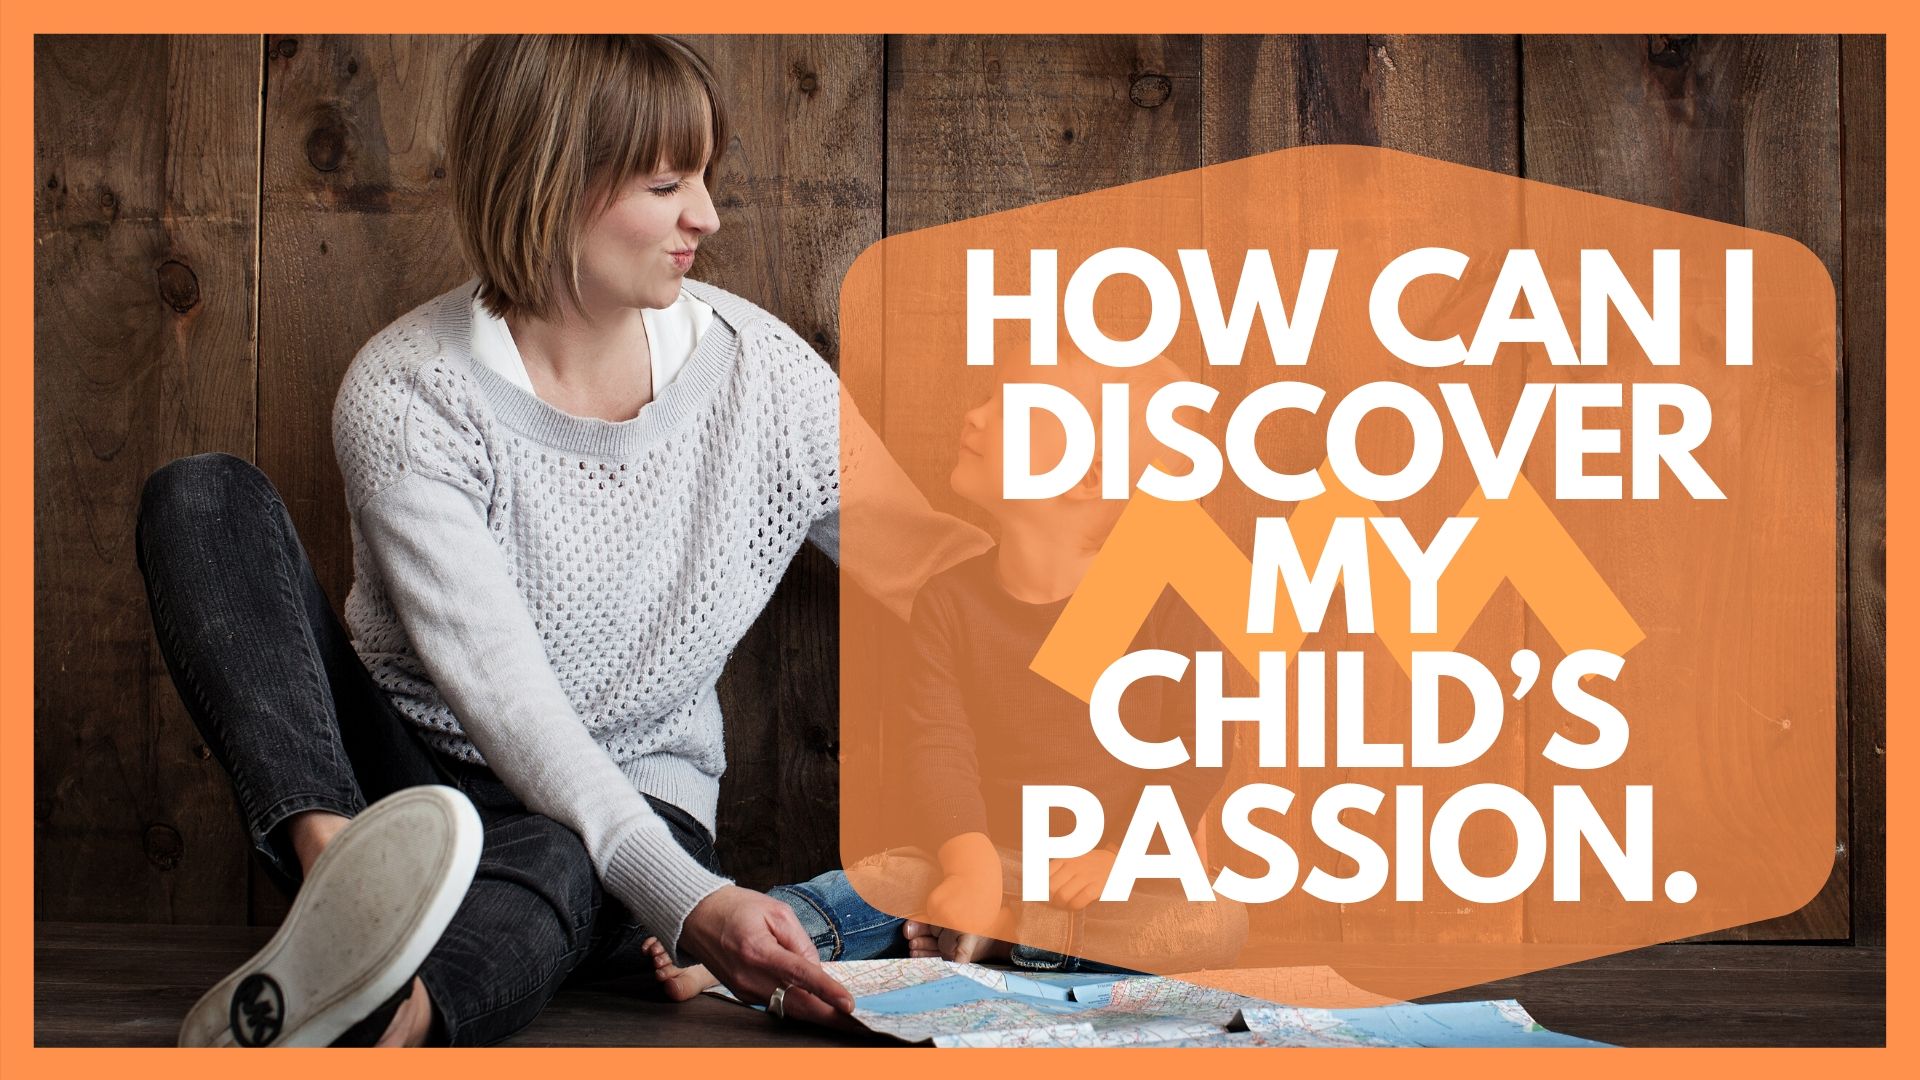 HOW CAN I DISCOVER MY CHILD’S PASSION